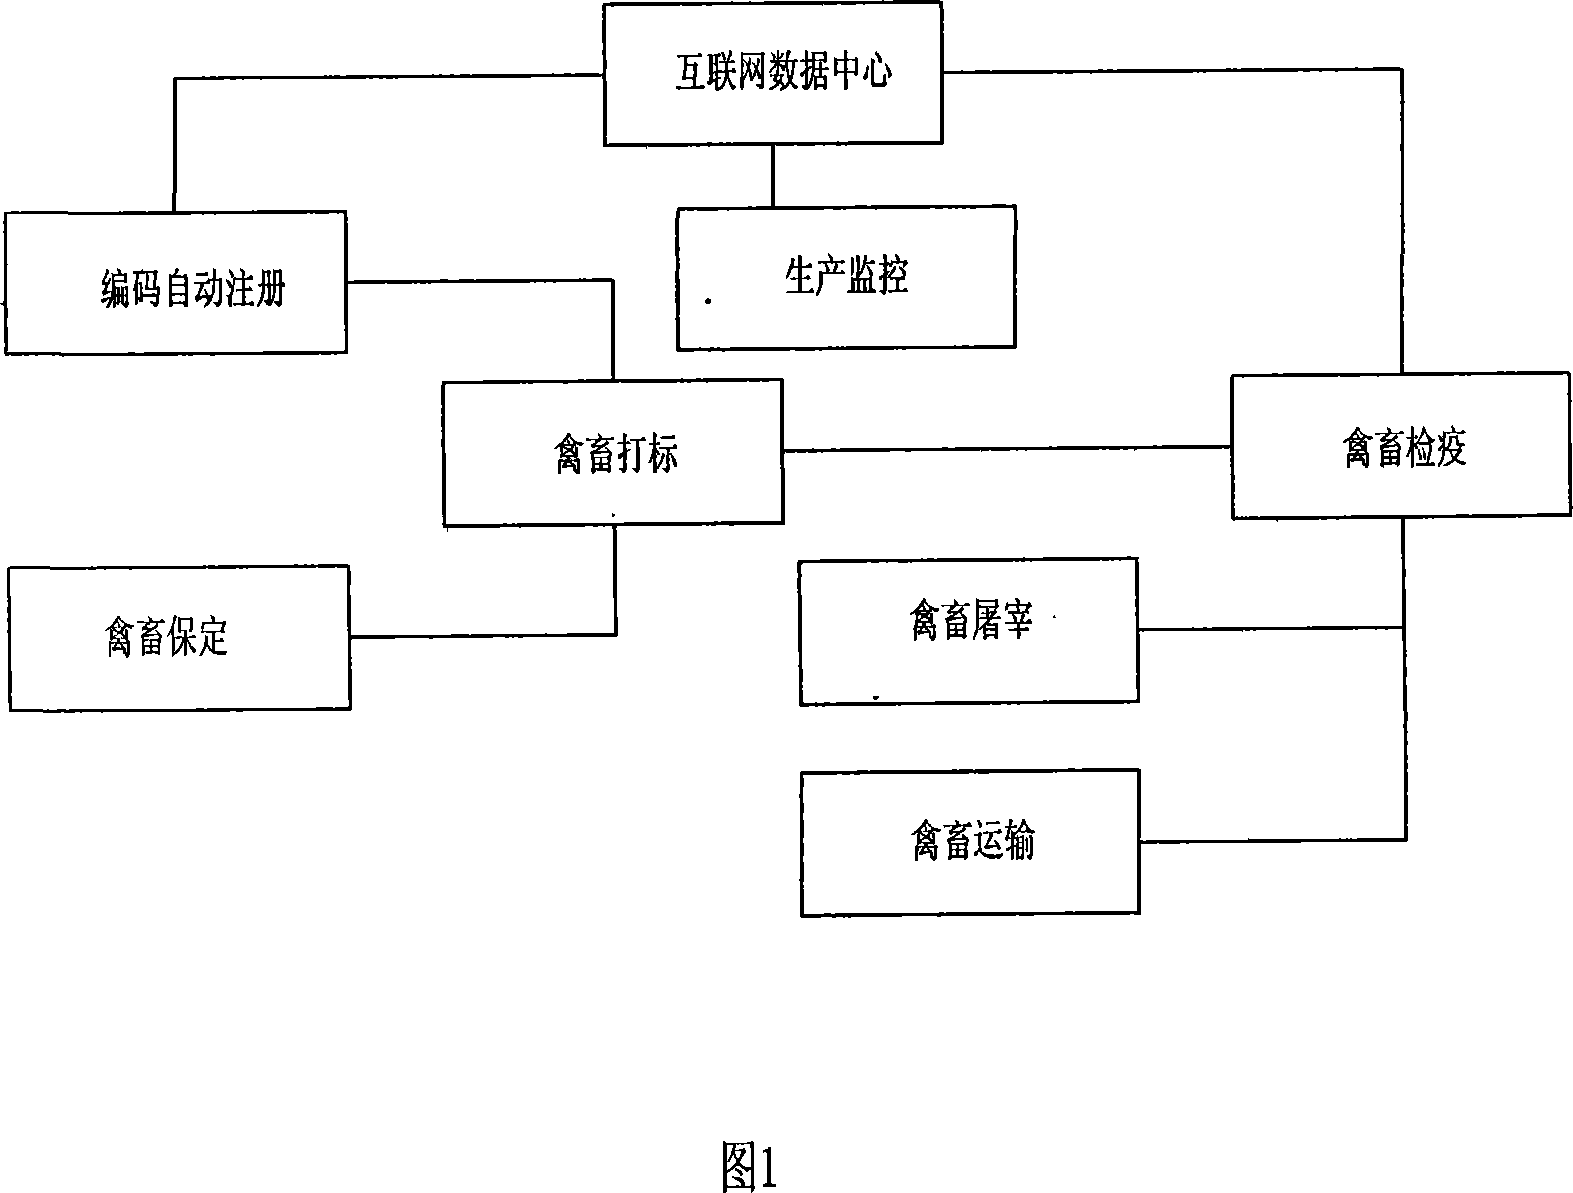 Automatic monitoring system and method for domestic animals safety production